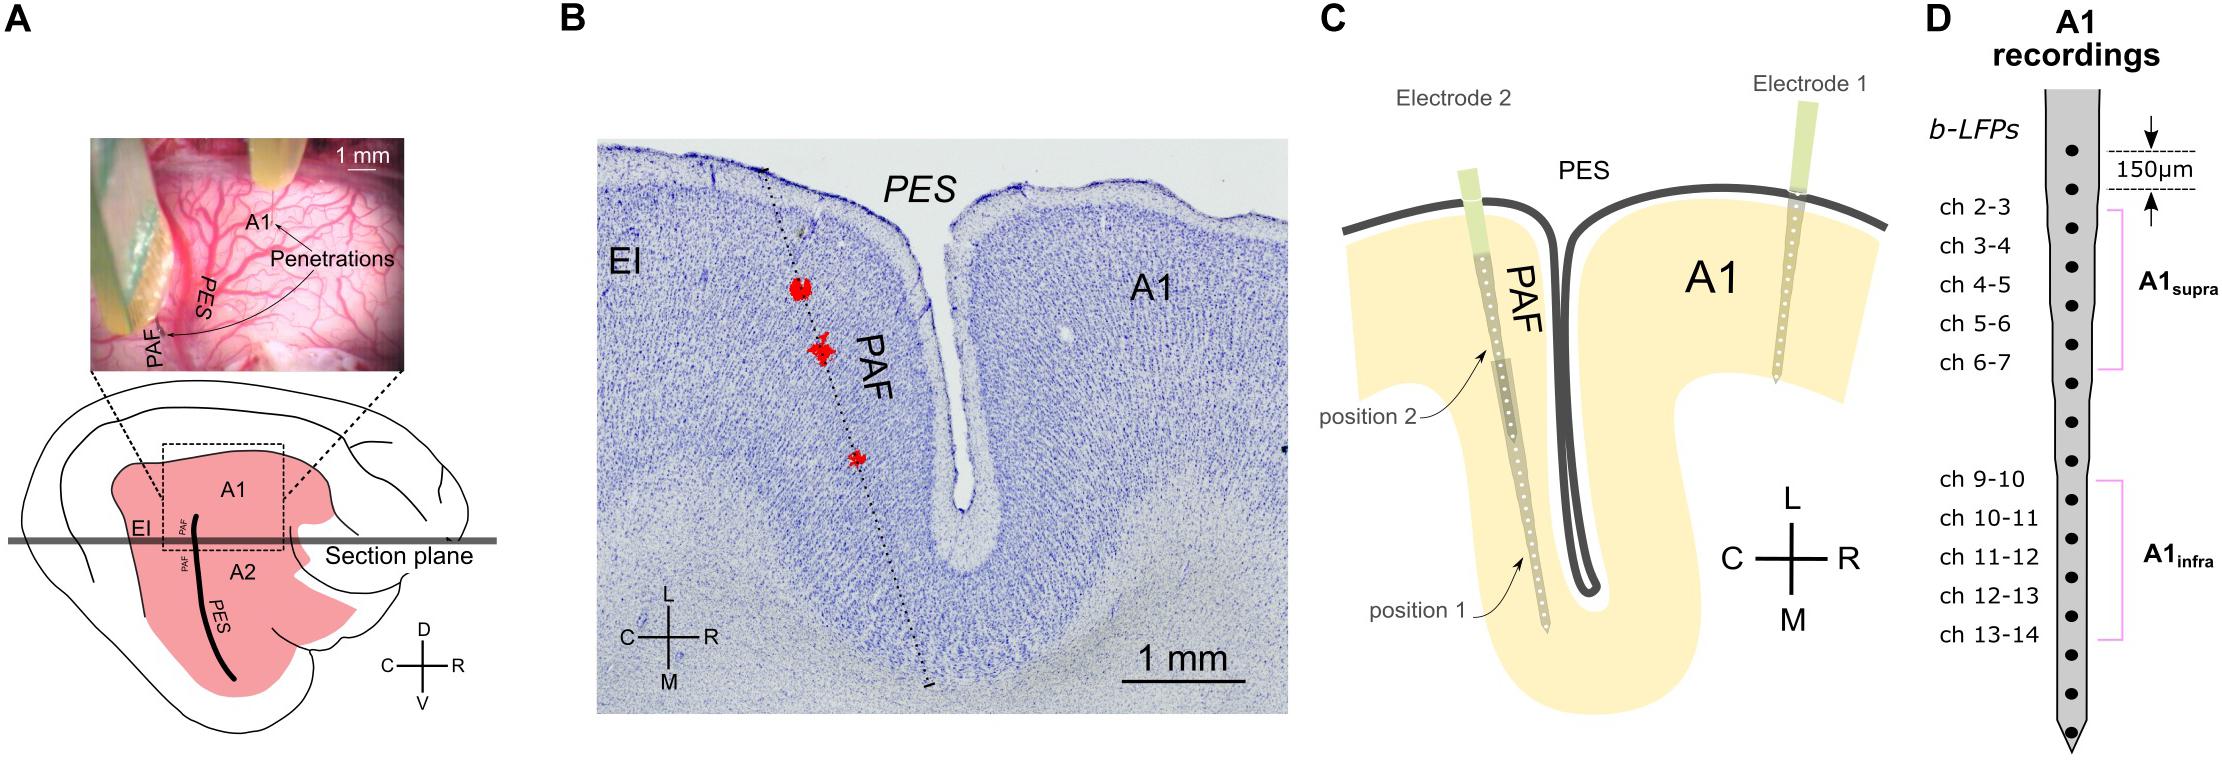 Deafness Weakens Interareal Couplings in the Auditory Cortex